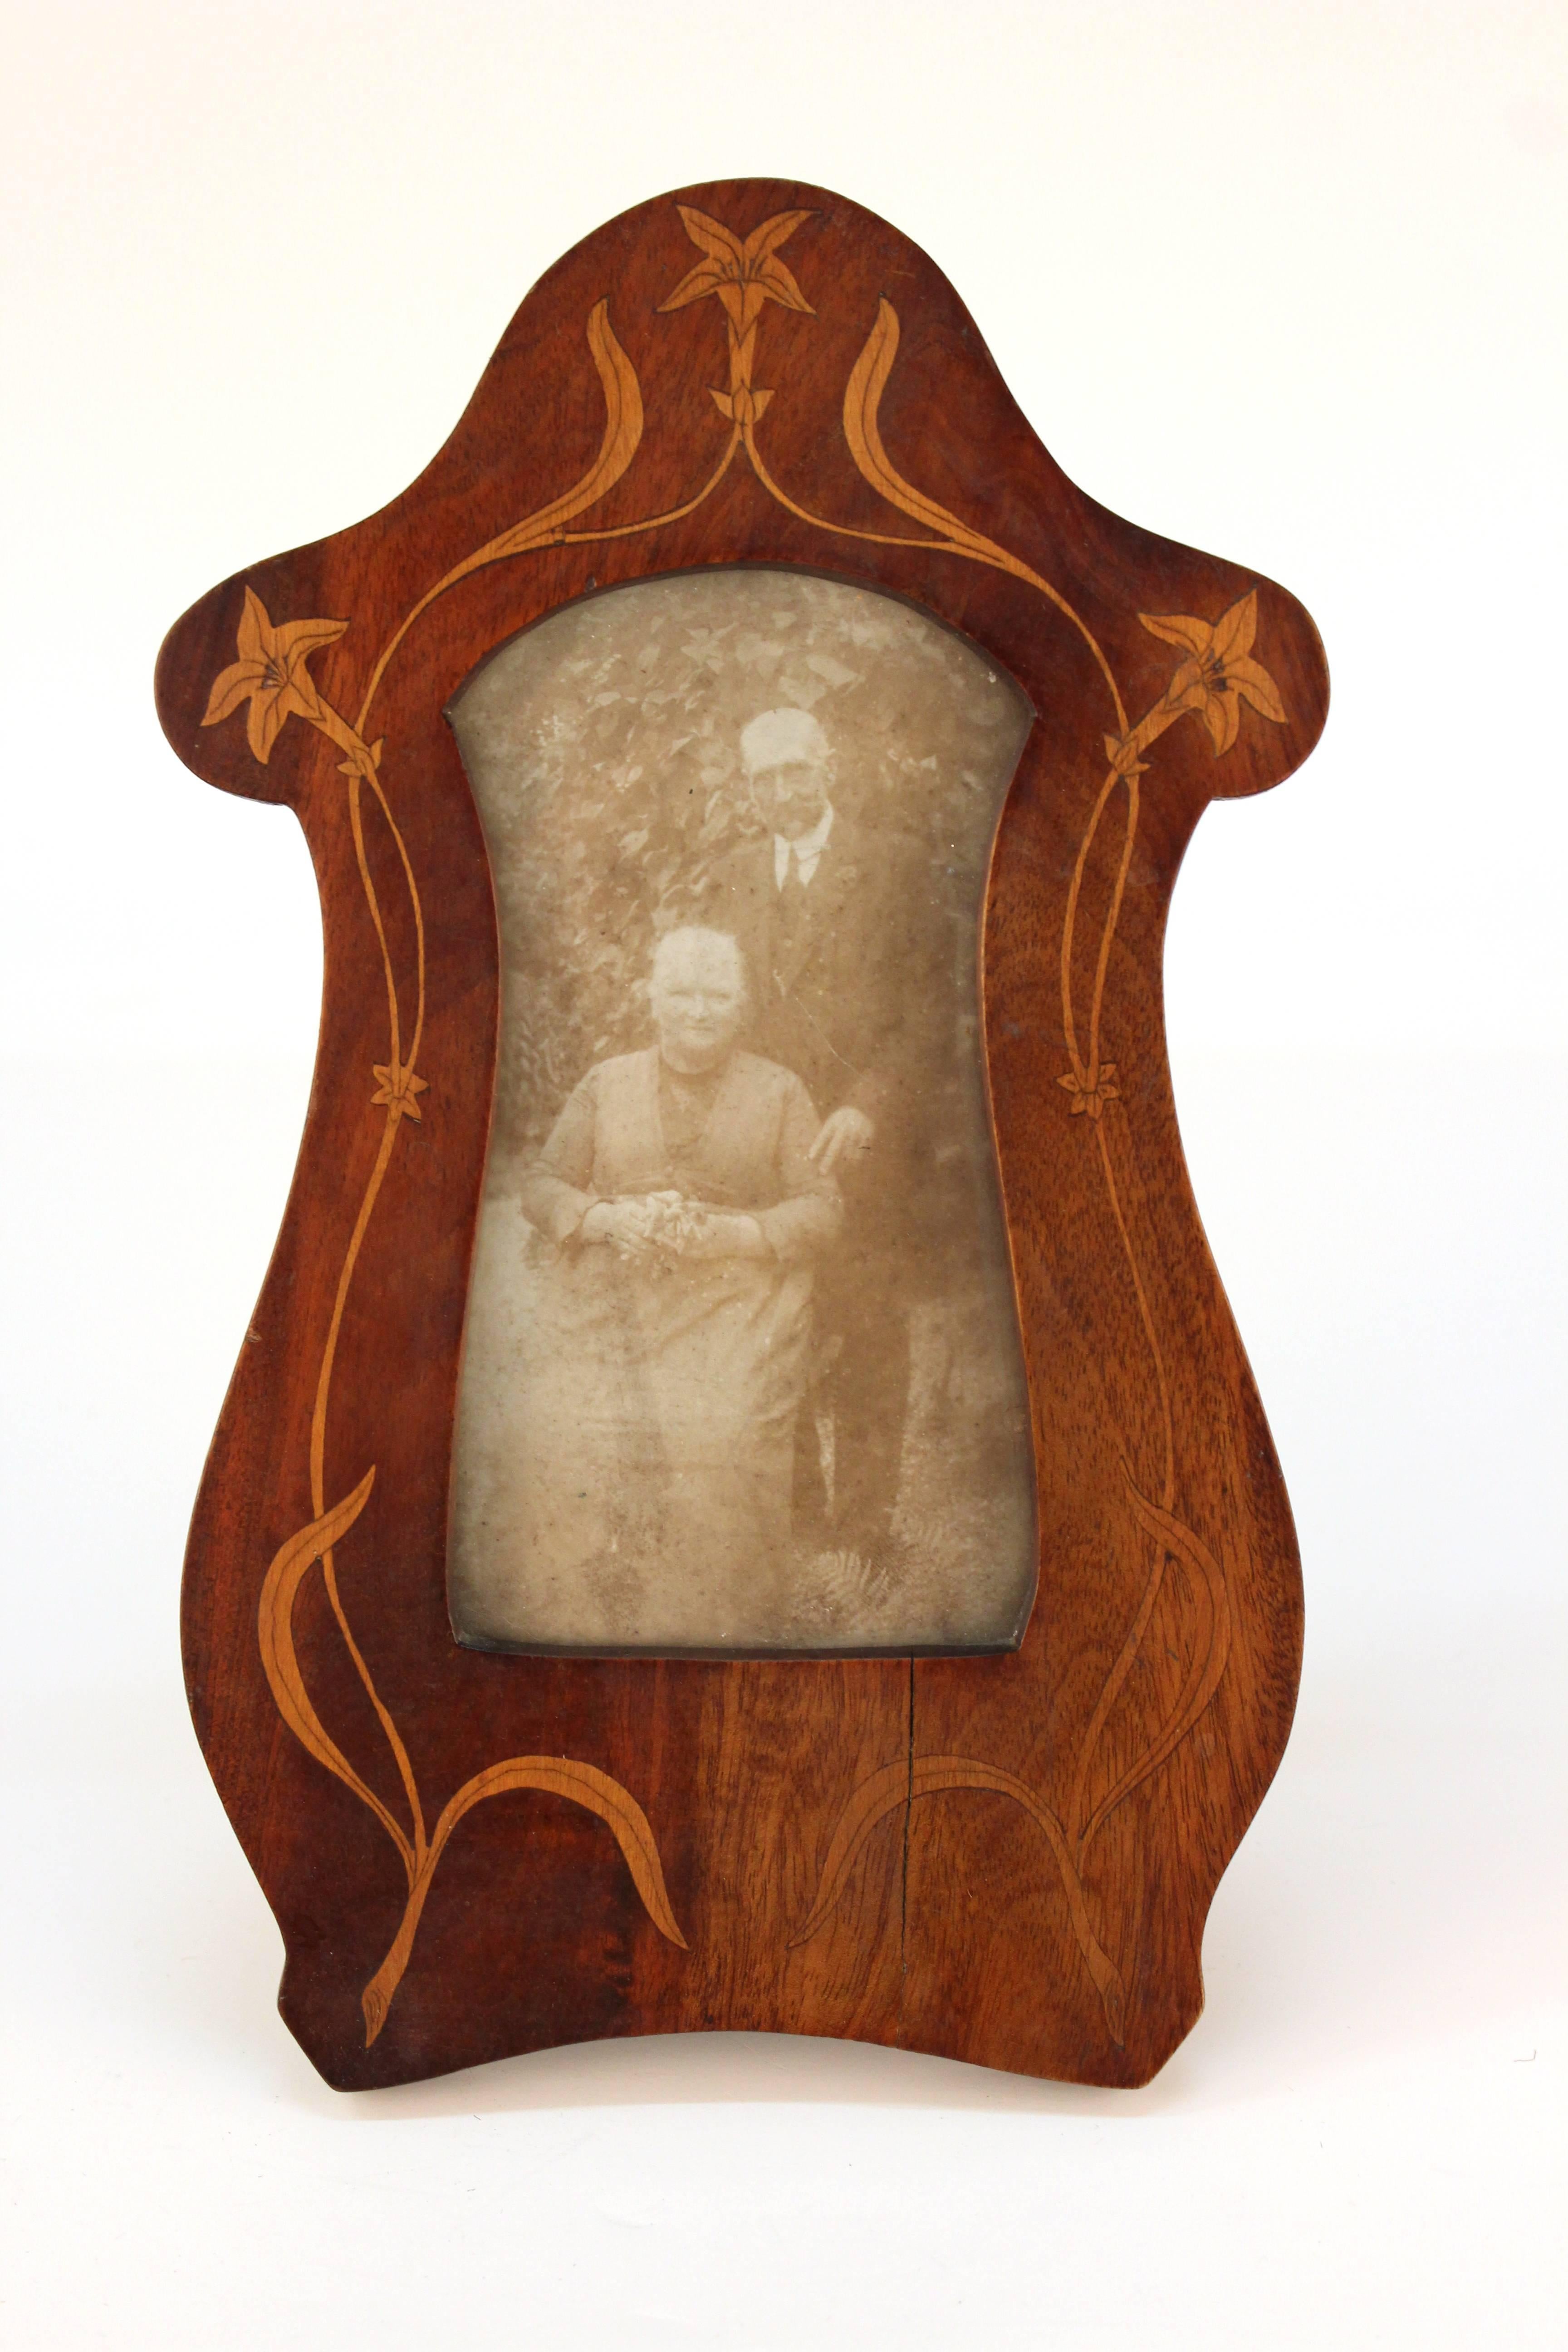 An Art Nouveau picture frame. Organically shaped with floral accents. The frame includes an original black and white photo of an elderly couple. Despite some wear to the frame and fading to the photograph the item remains in overall good vintage